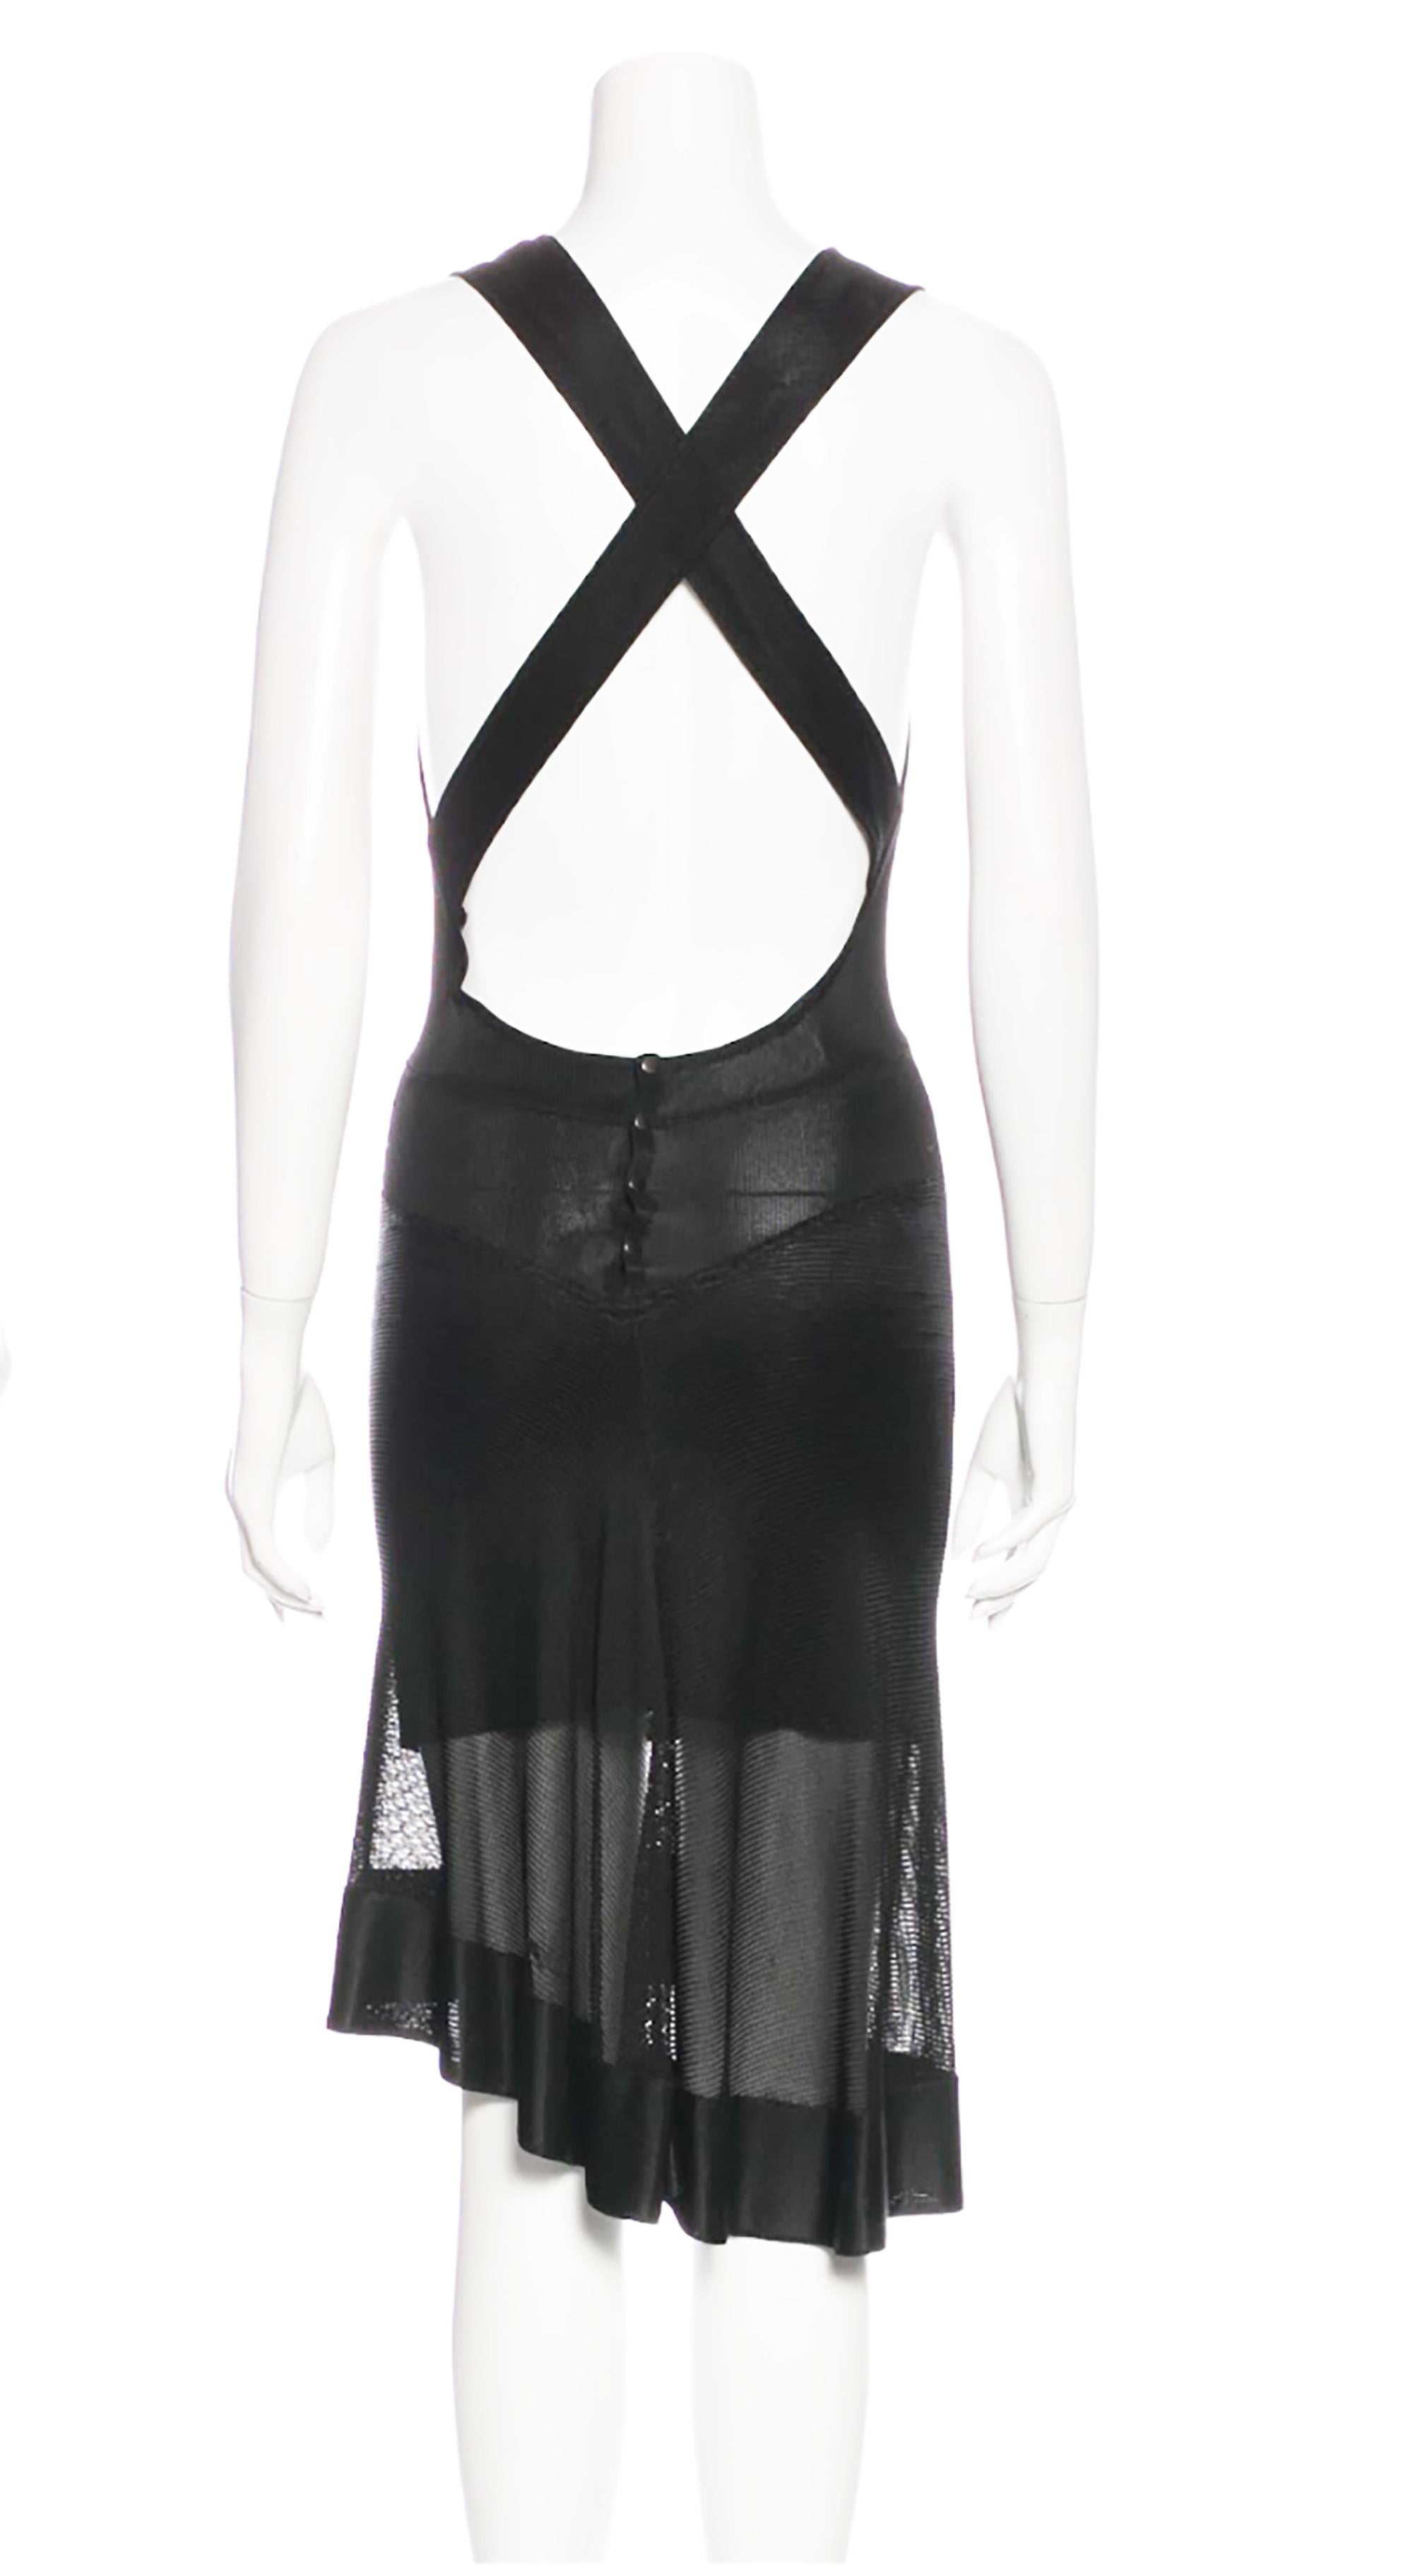 1990s ALAIA BLACK SHEER PANELING CRISS CROSS DRESS
Condition: Excellent
sz Small